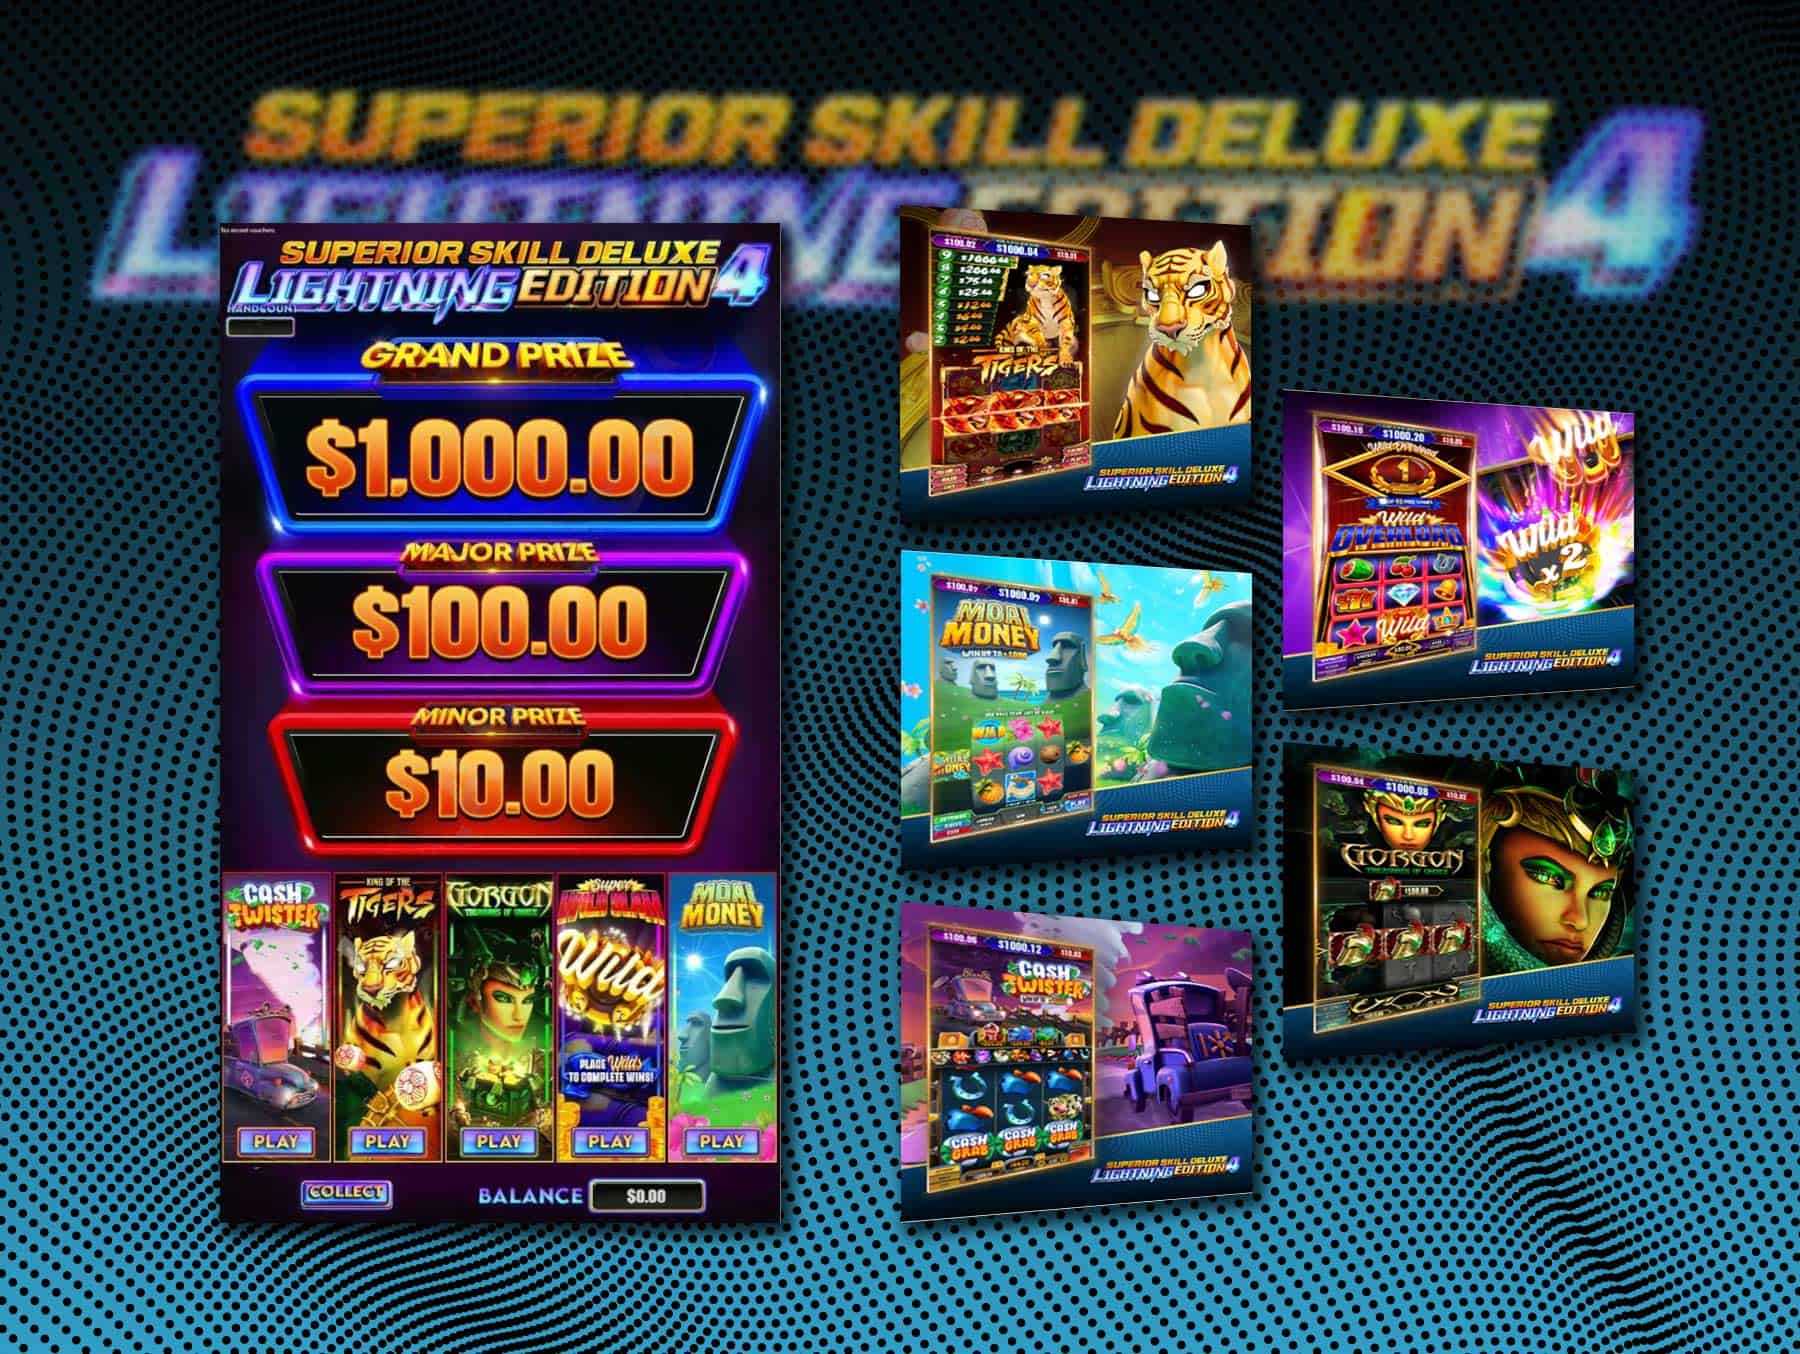 You are currently viewing Superior Skill Deluxe Lightning Edition 4 Multi Game now available